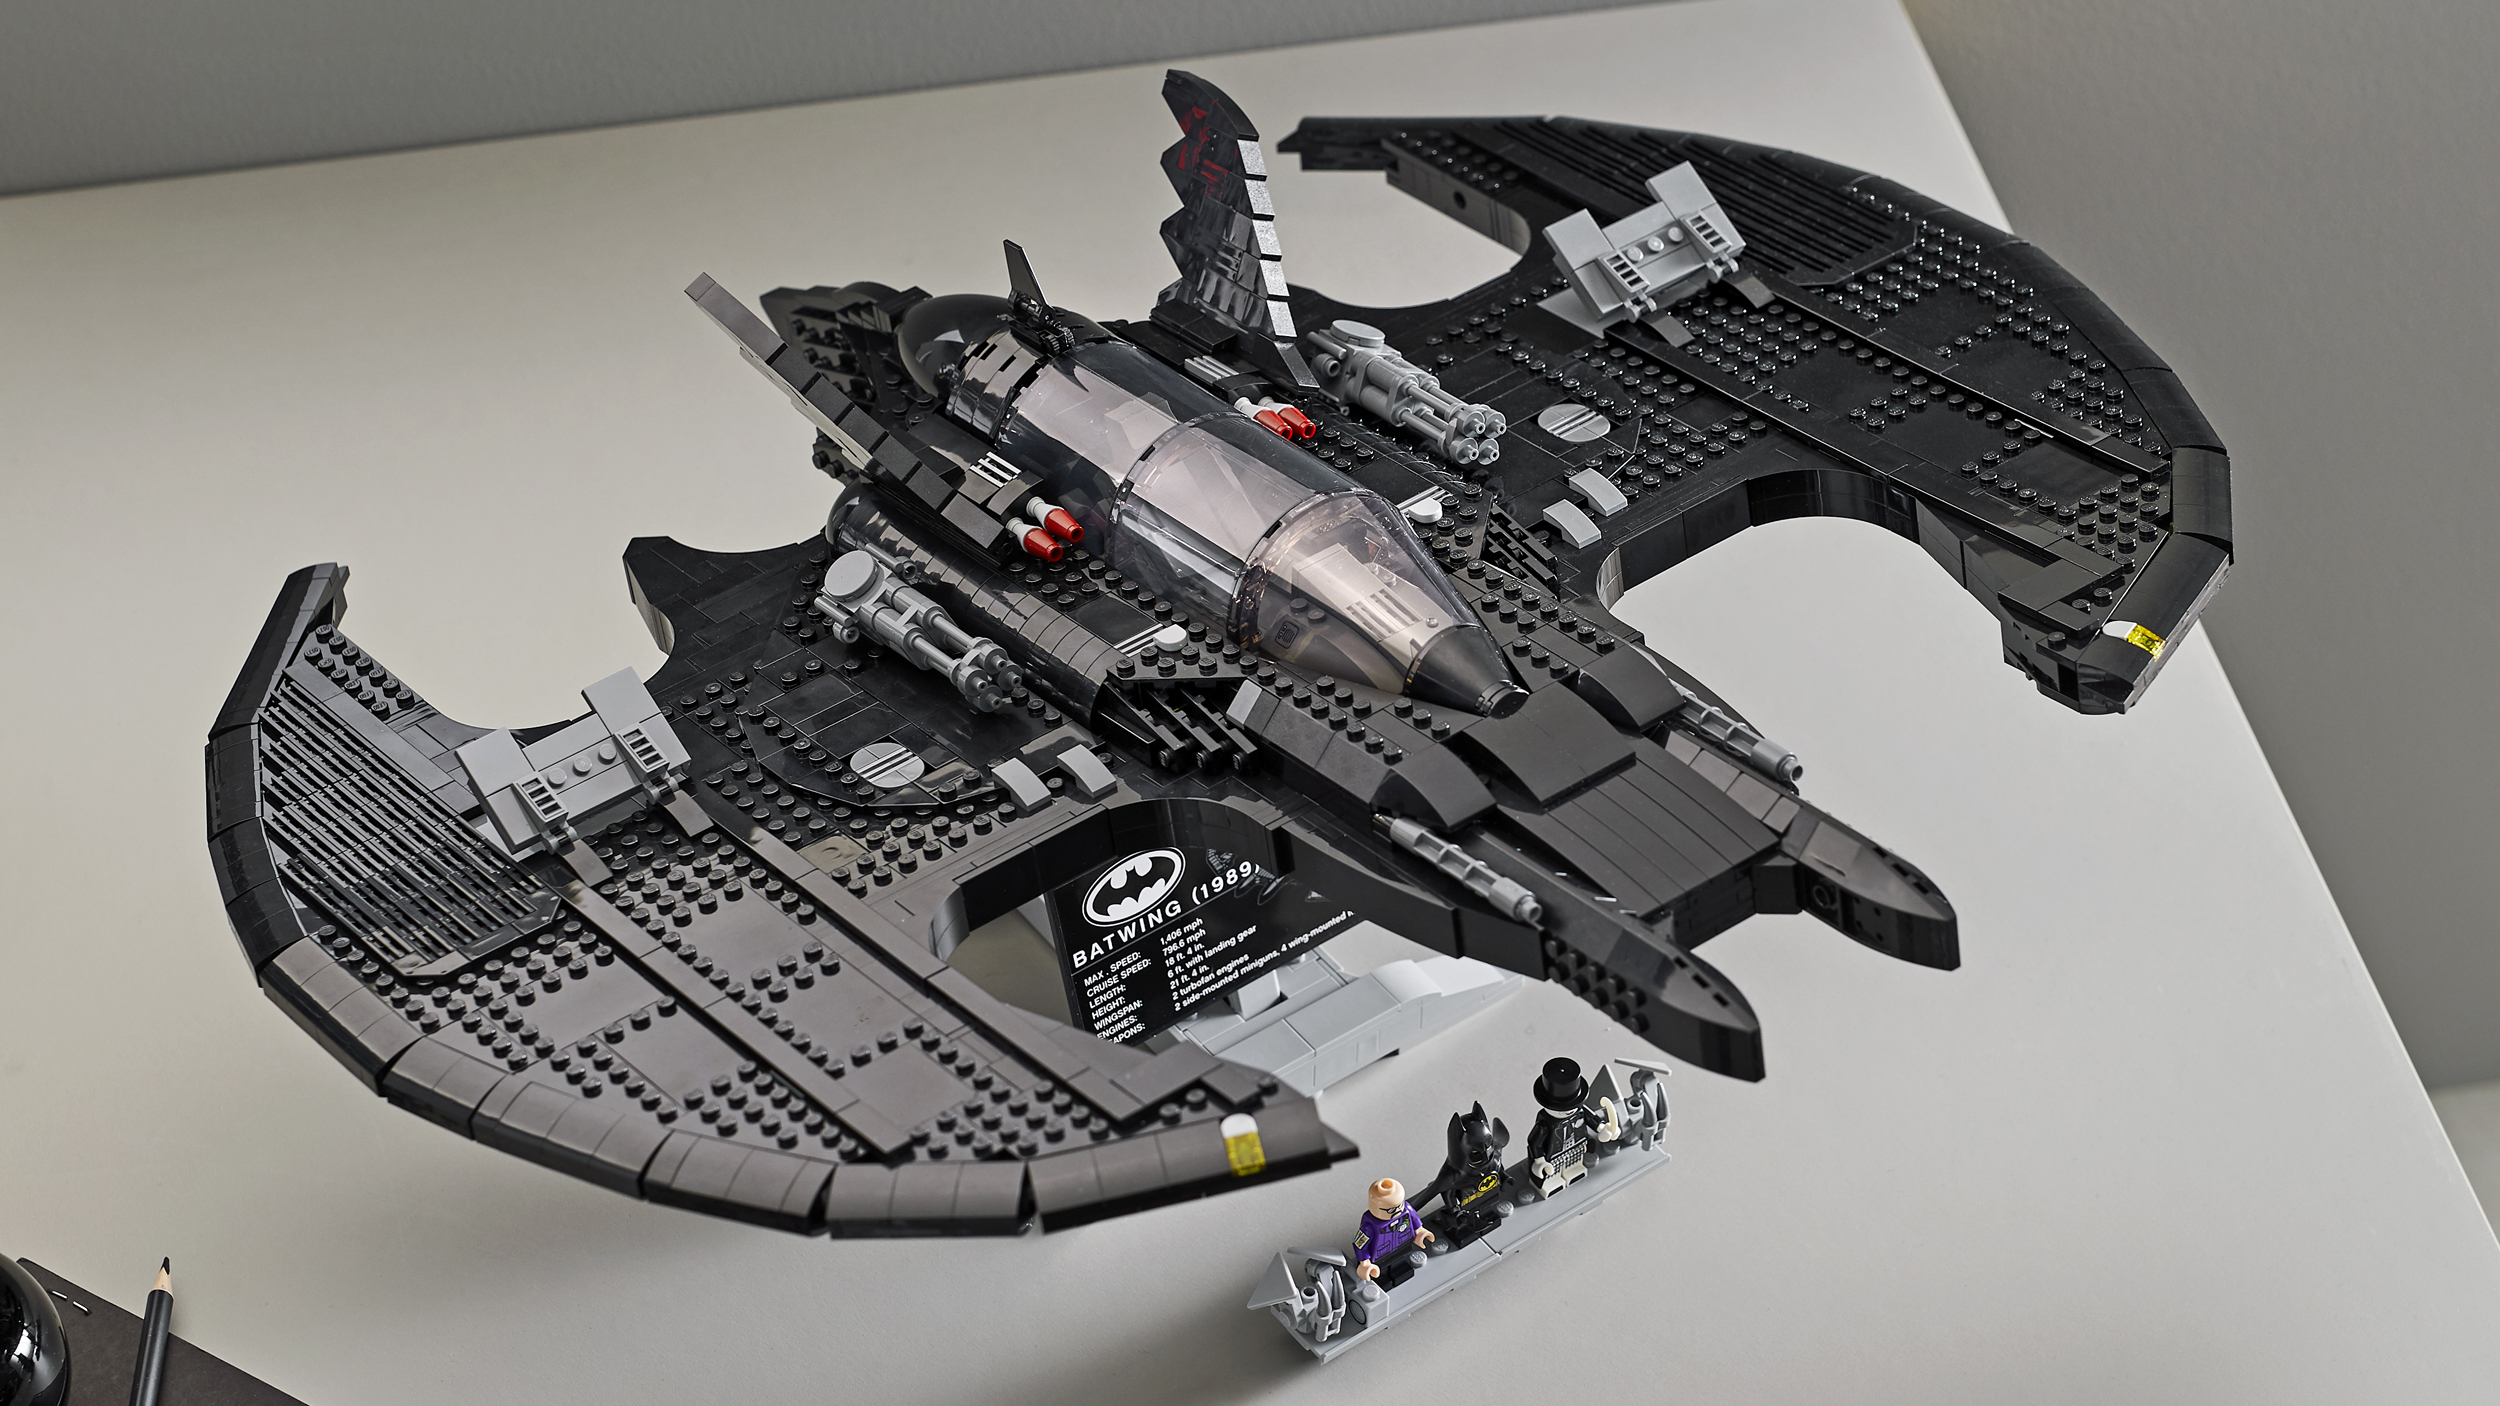 While not a complete studs-not-on-top (SNOT) build, as with the 1989 Batmobile the Lego Batwing faithfully recreates the vehicle's curves. (Image: Lego)